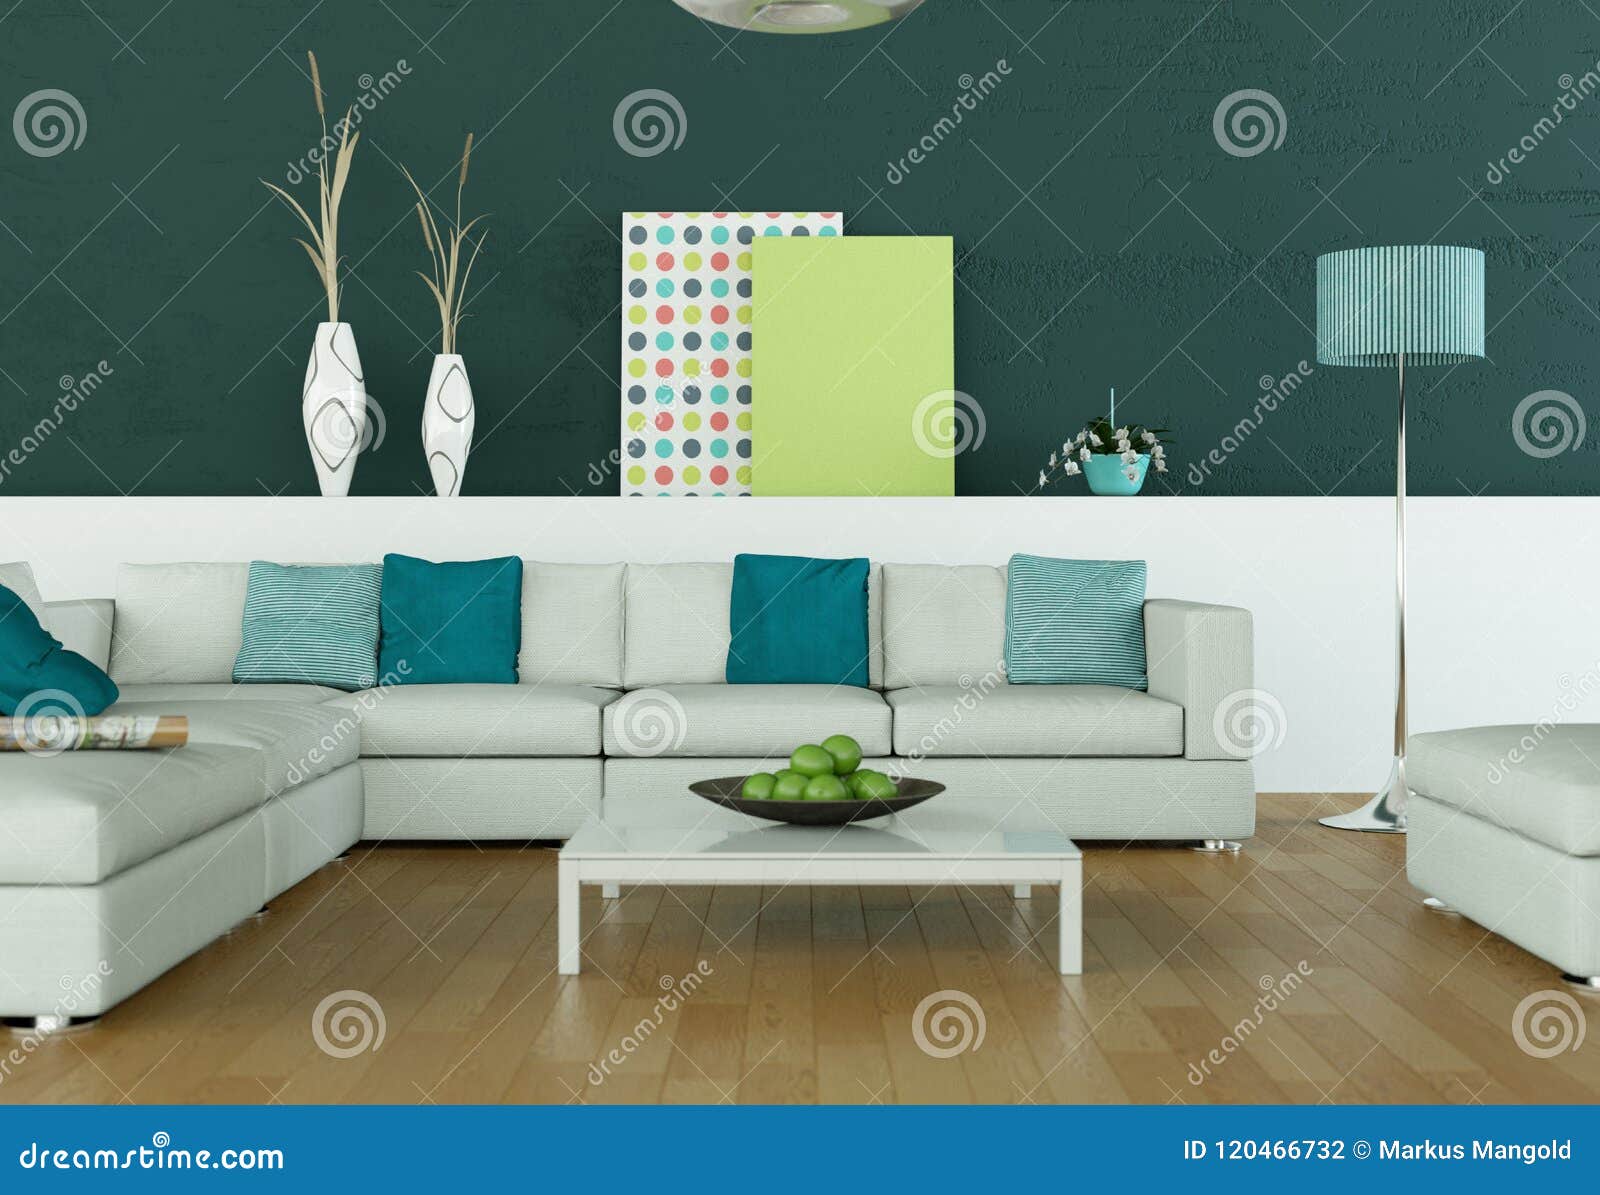 Bright Room With White Sofa In Front Of A Green Wall Stock